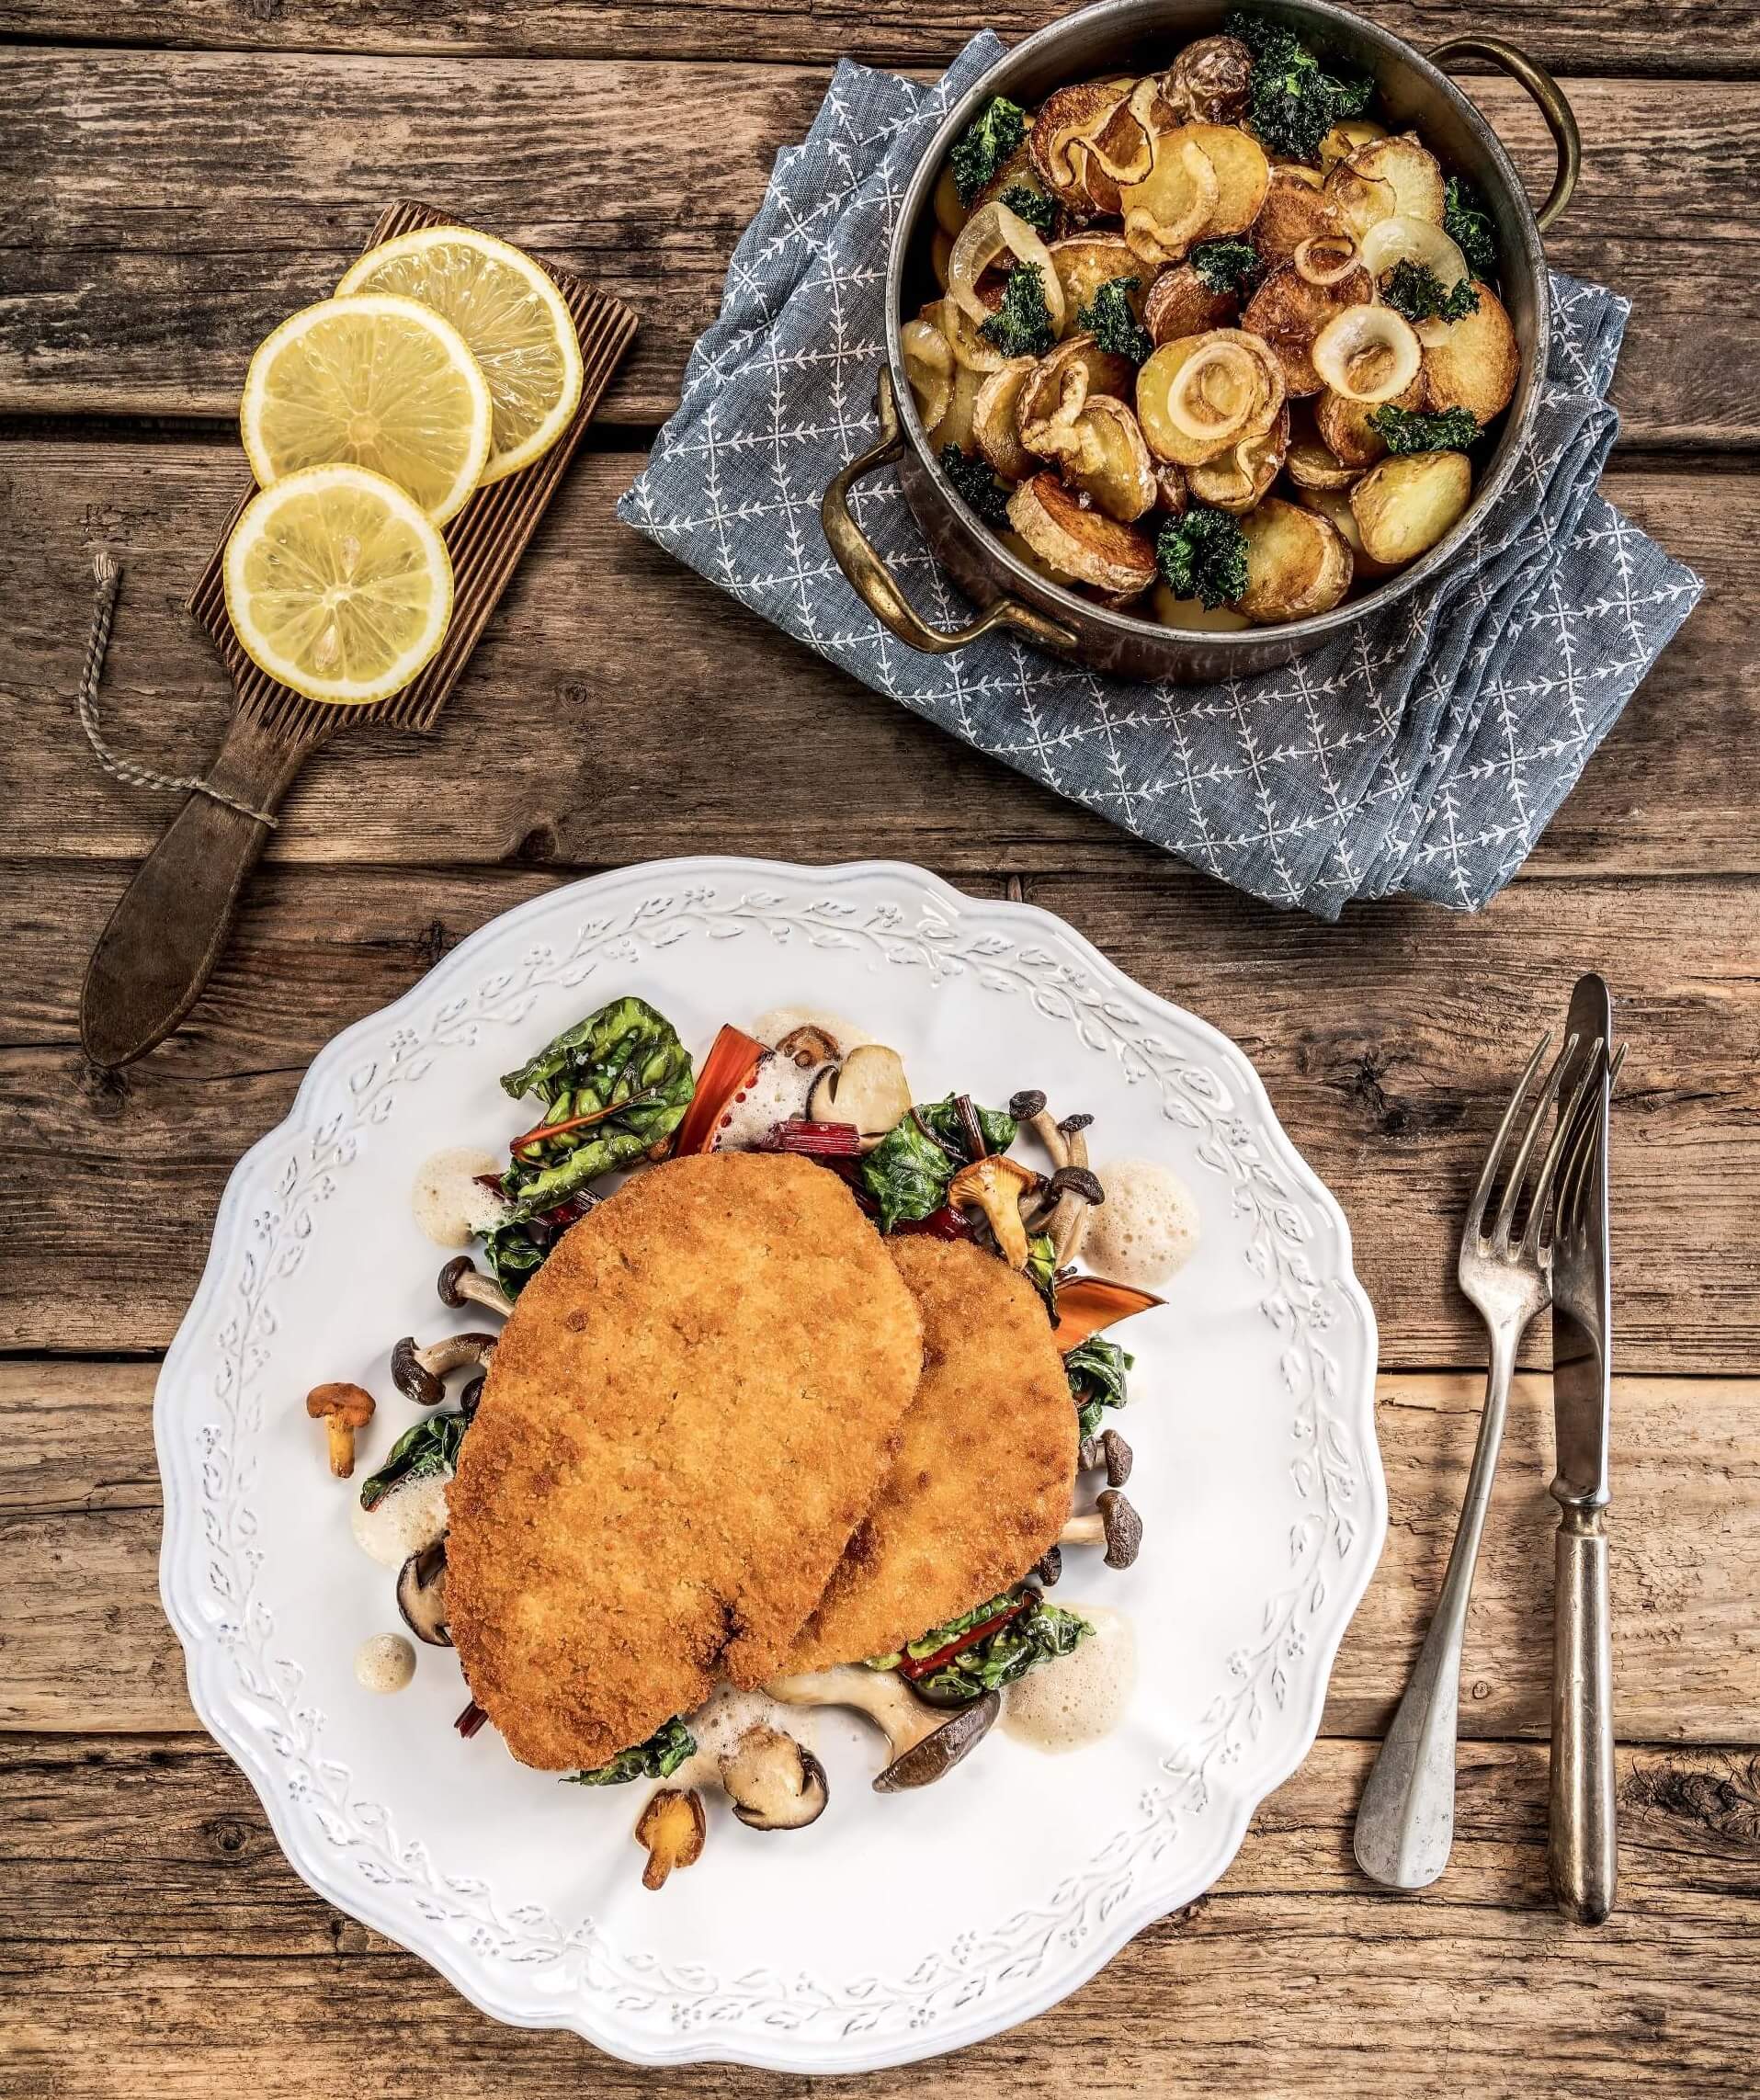 Is there a vegetable alternative to schnitzel? beyond meat or rebel meat?